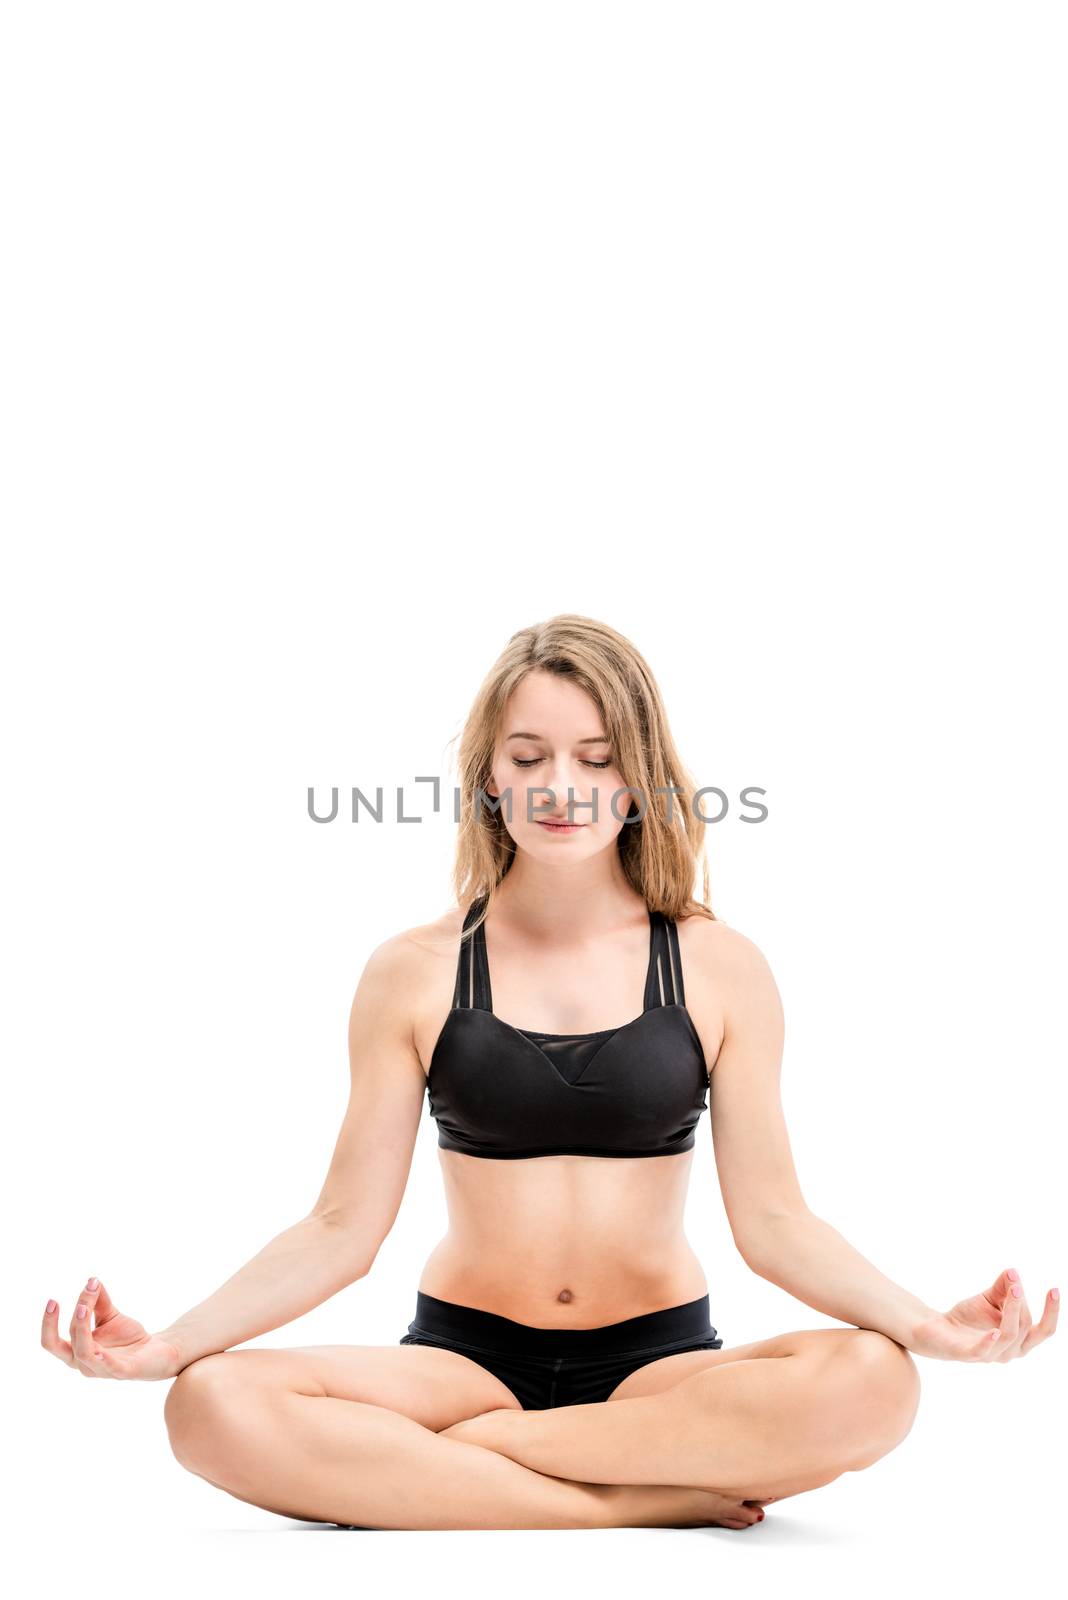 shapely beautiful girl engaged in yoga in sports panties and top by kosmsos111